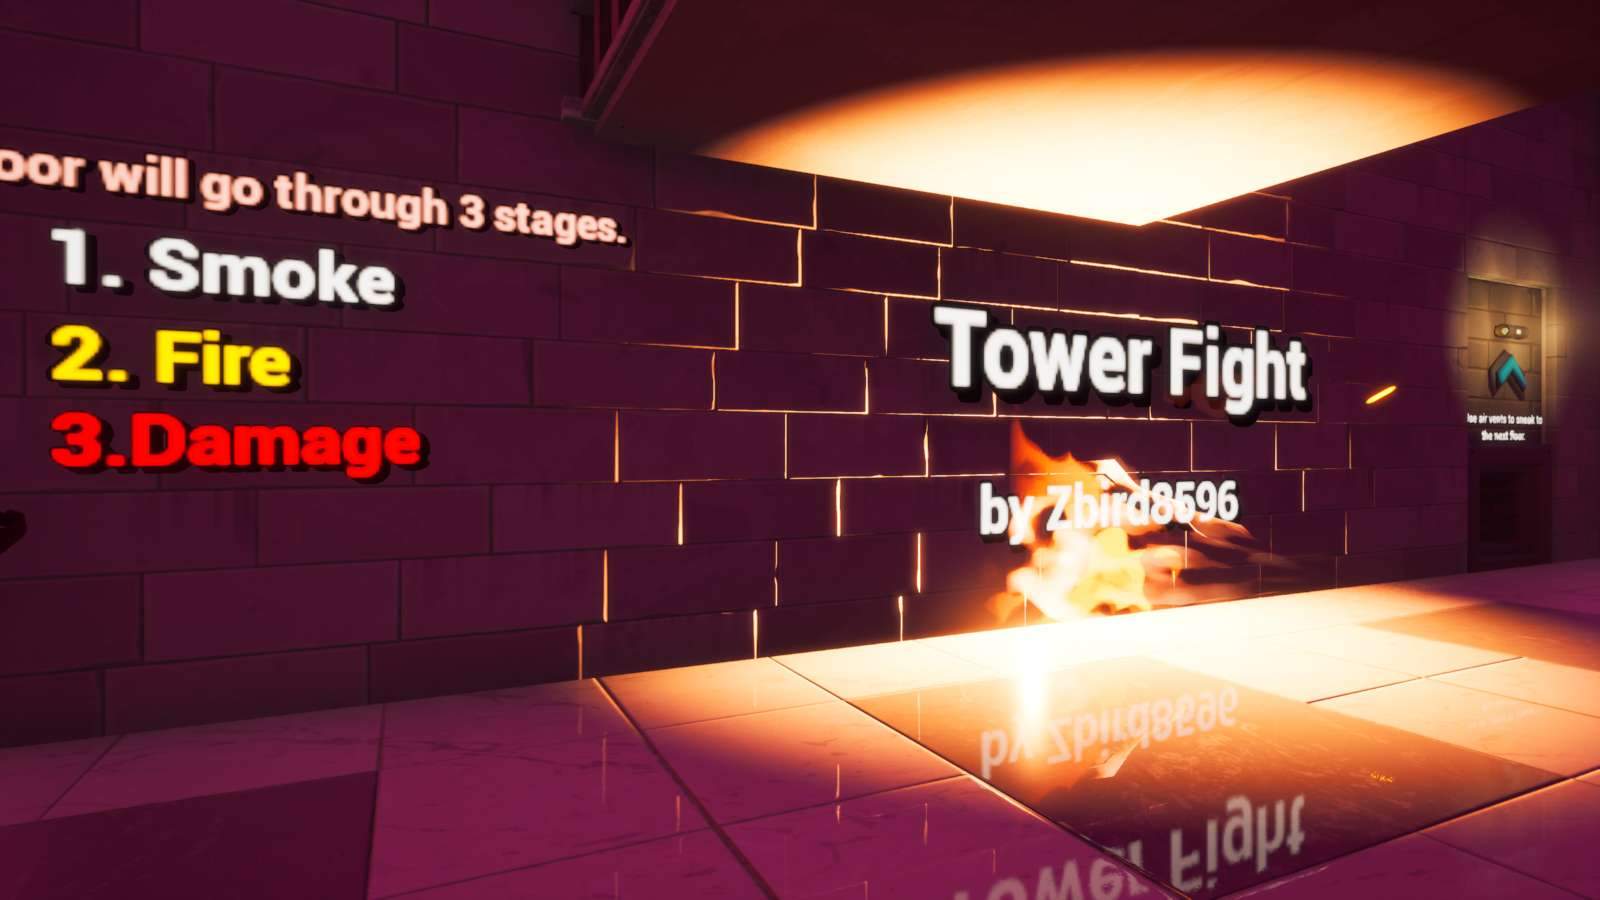 Tower Fight